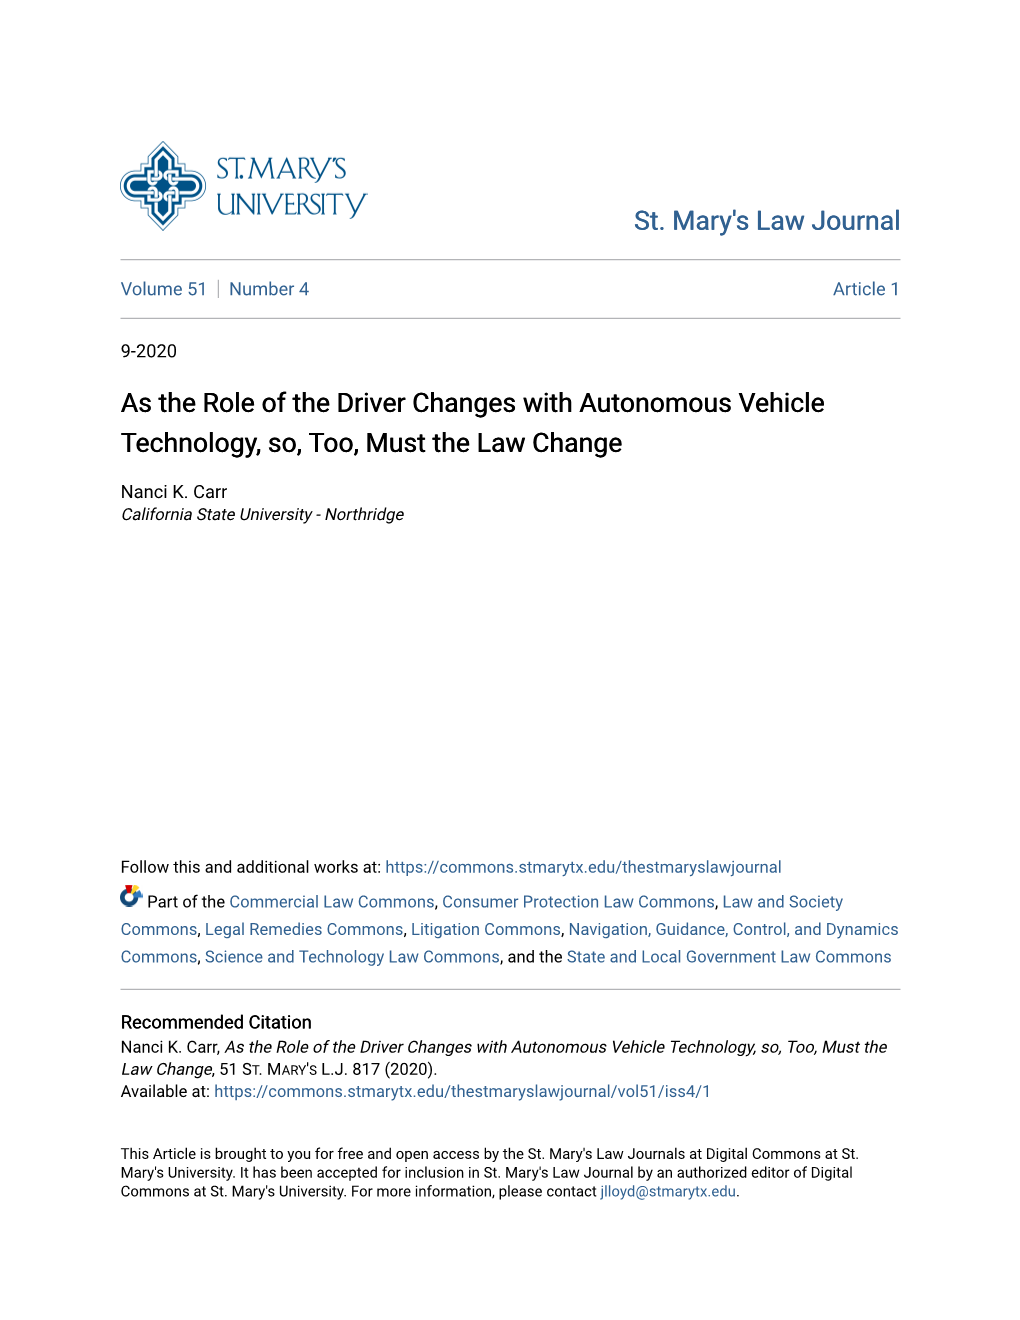 As the Role of the Driver Changes with Autonomous Vehicle Technology, So, Too, Must the Law Change